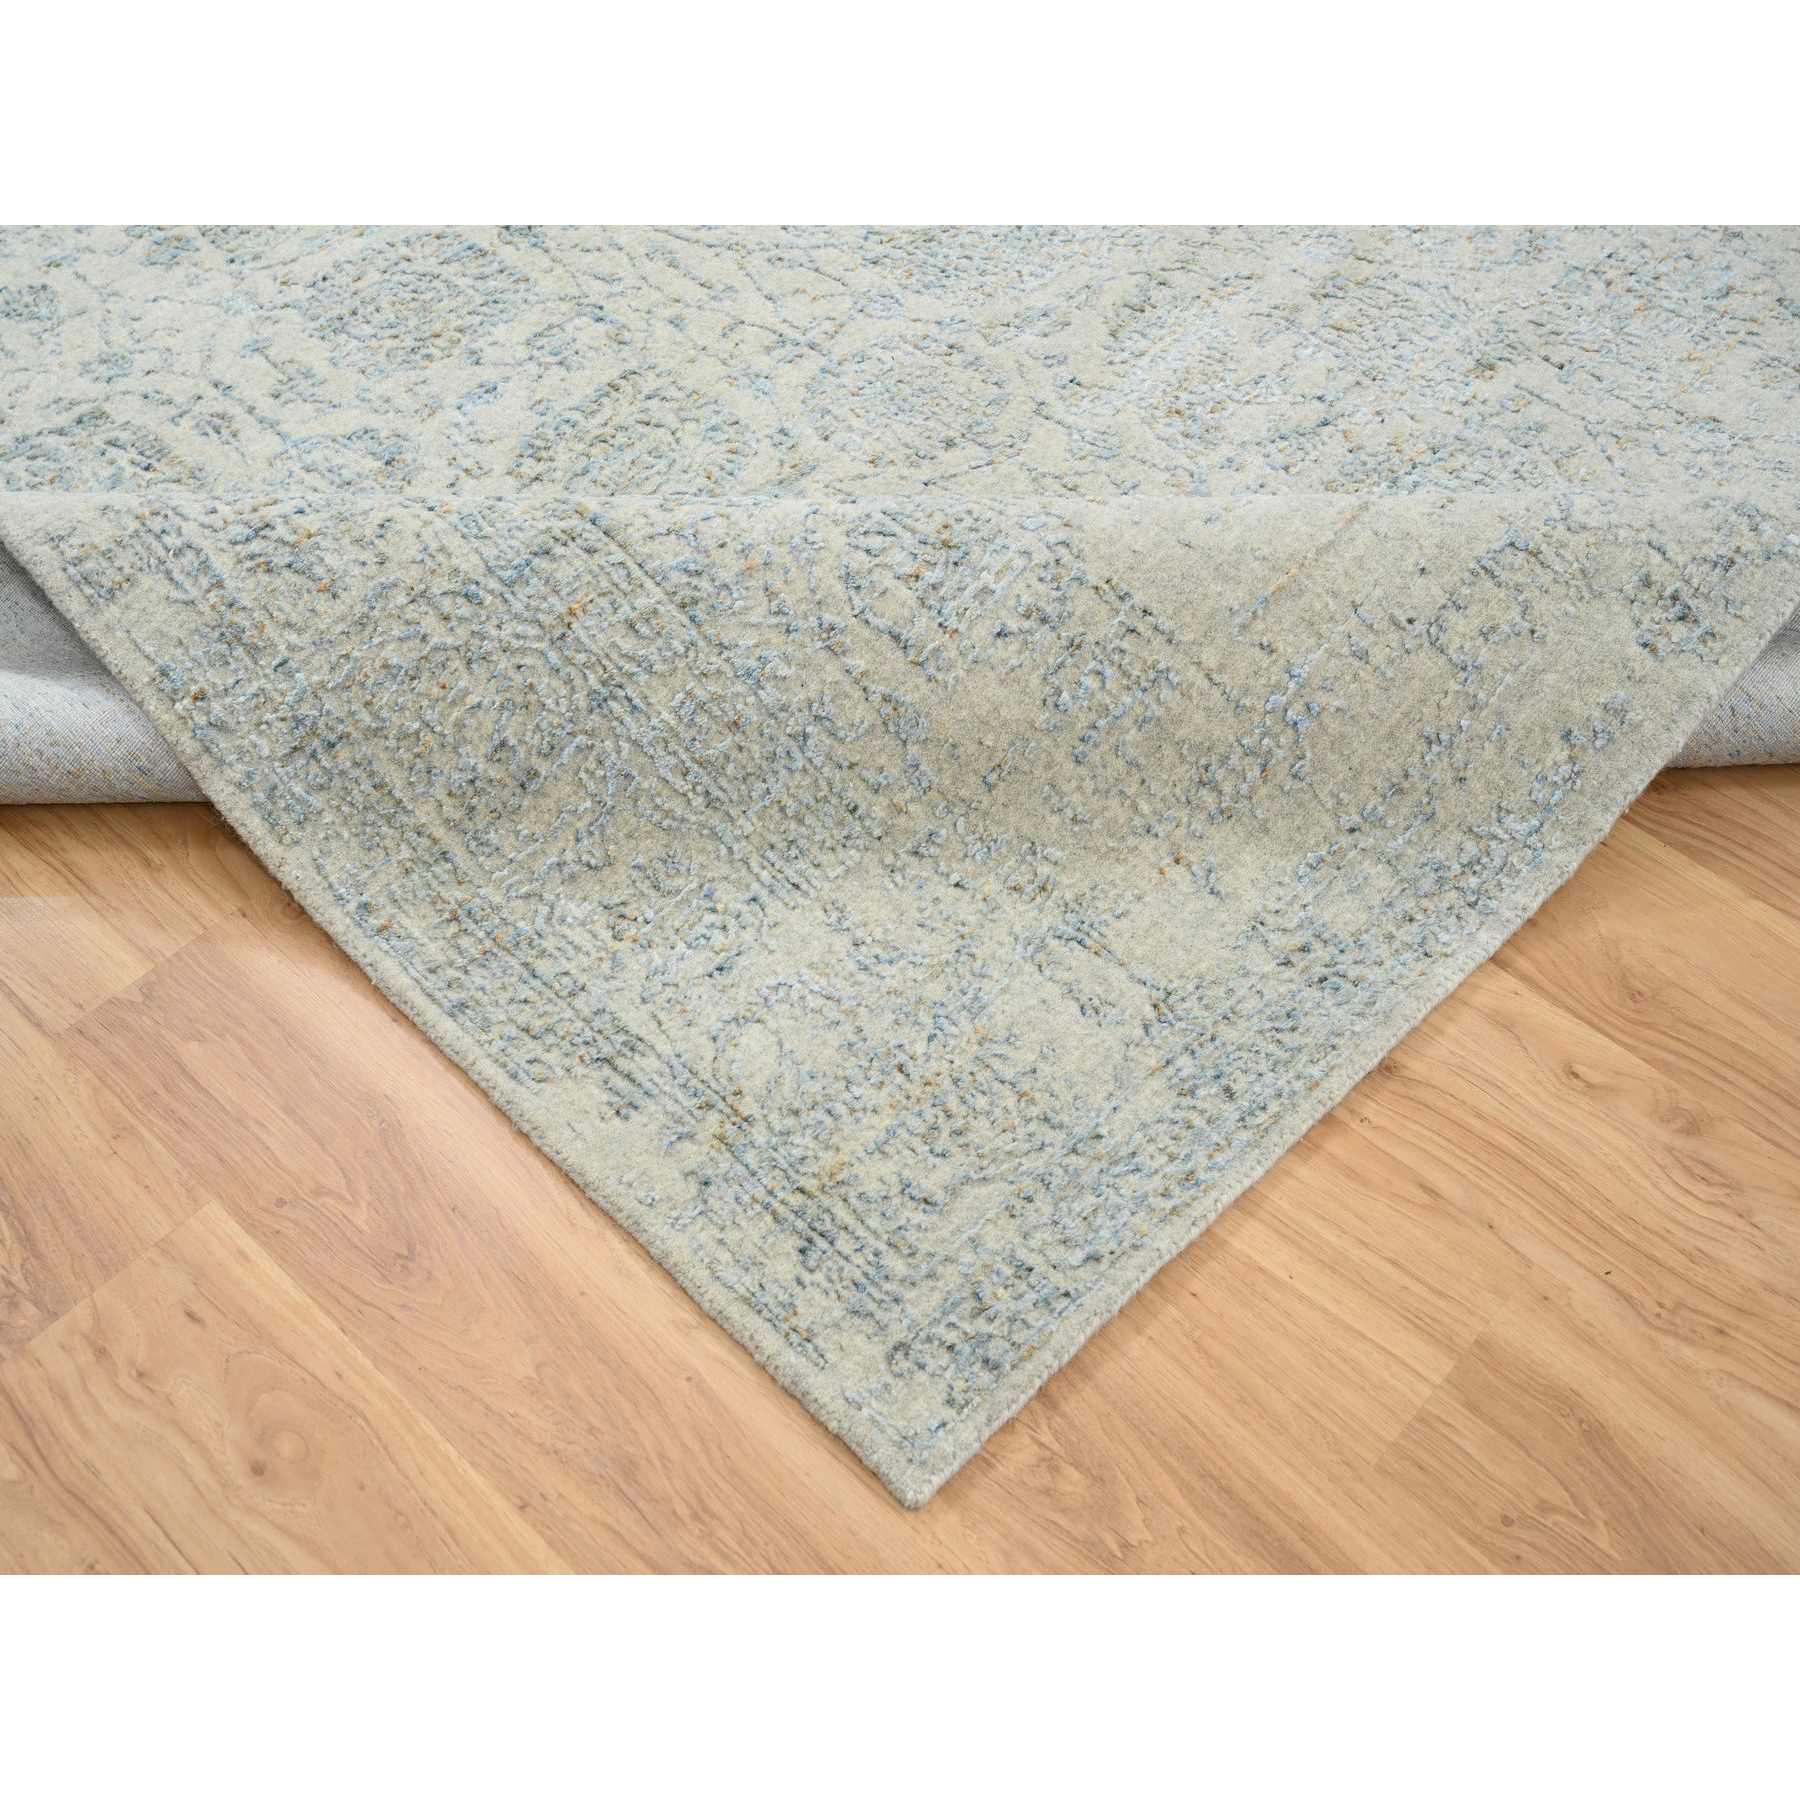 Transitional-Hand-Loomed-Rug-325170